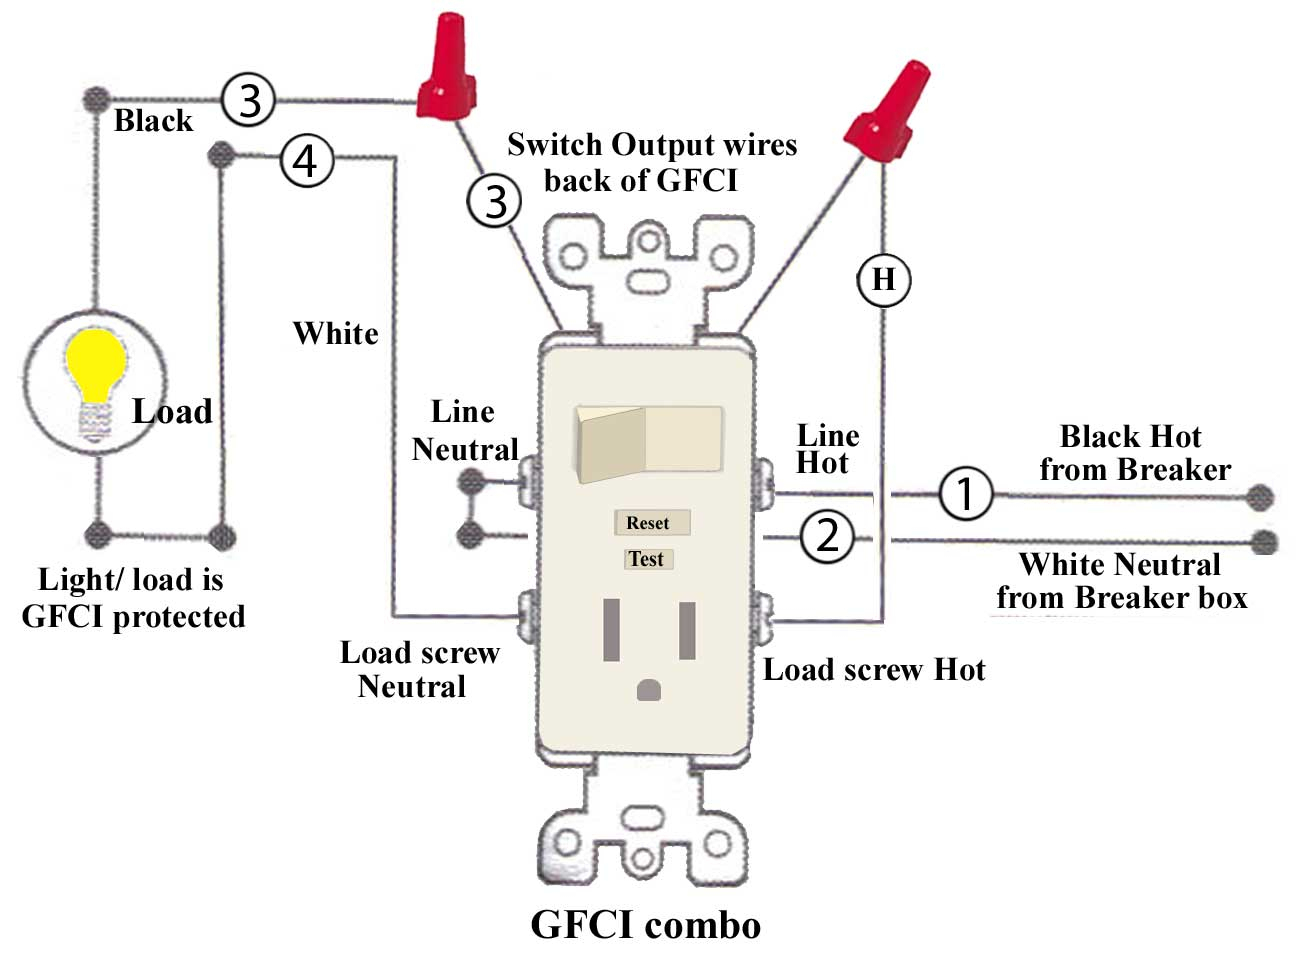 Combination Light Switch Wiring Diagram - Wiring Block Diagram - Light Switch To Outlet Wiring Diagram